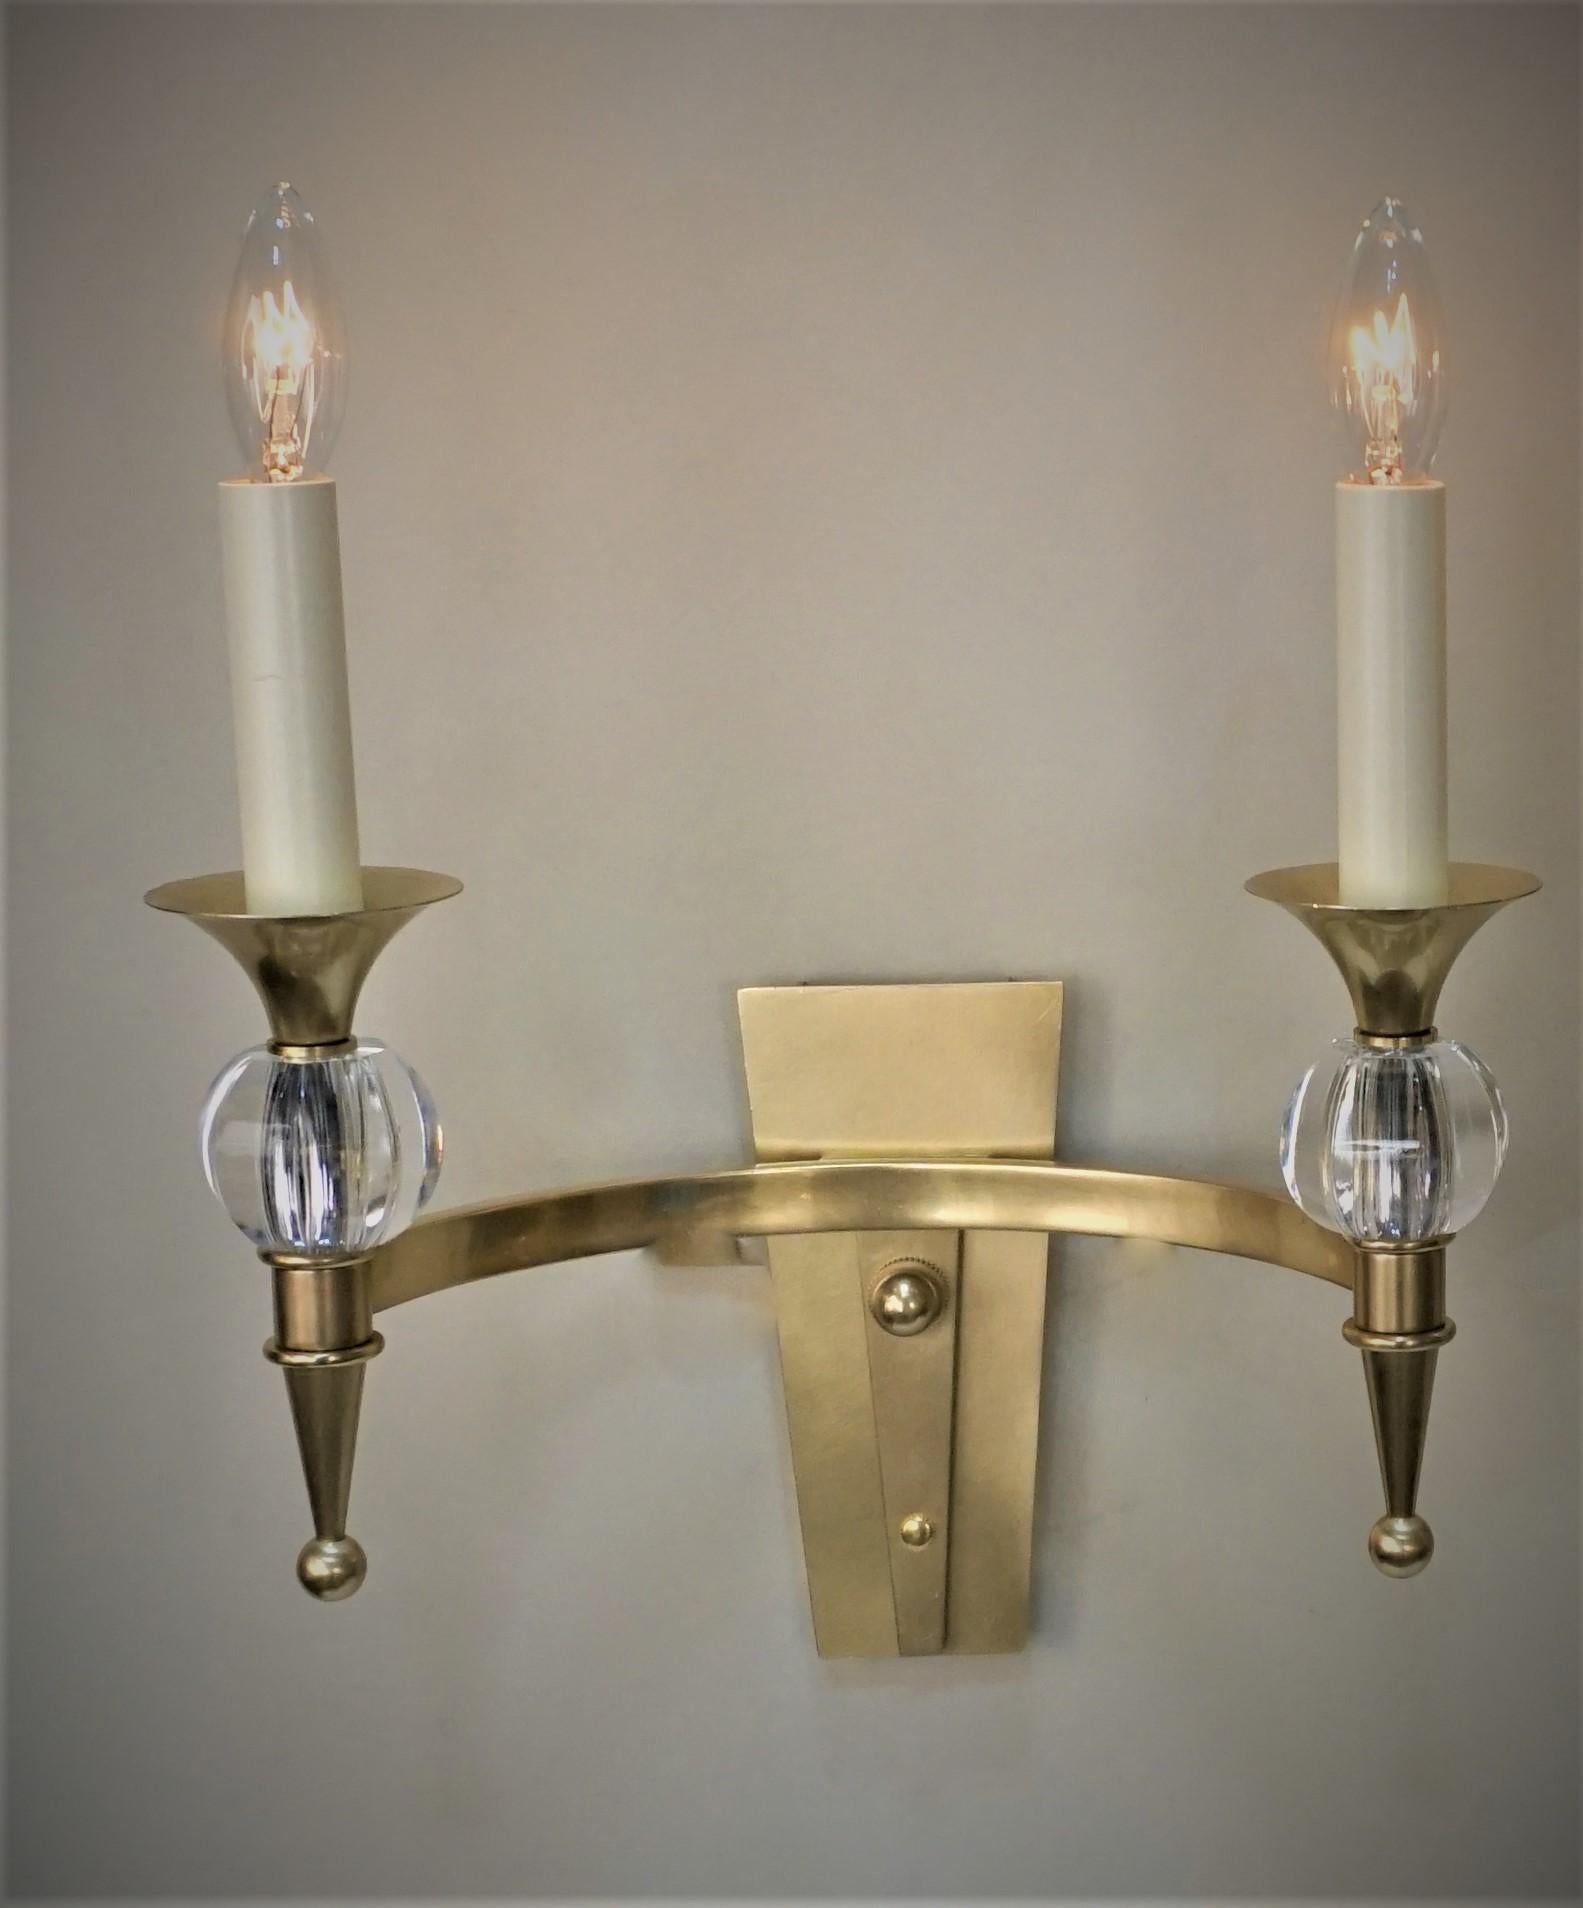 Pair of simple but elegant double arm bronze and crystal wall sconces.
Back of the back plate measurement: 2